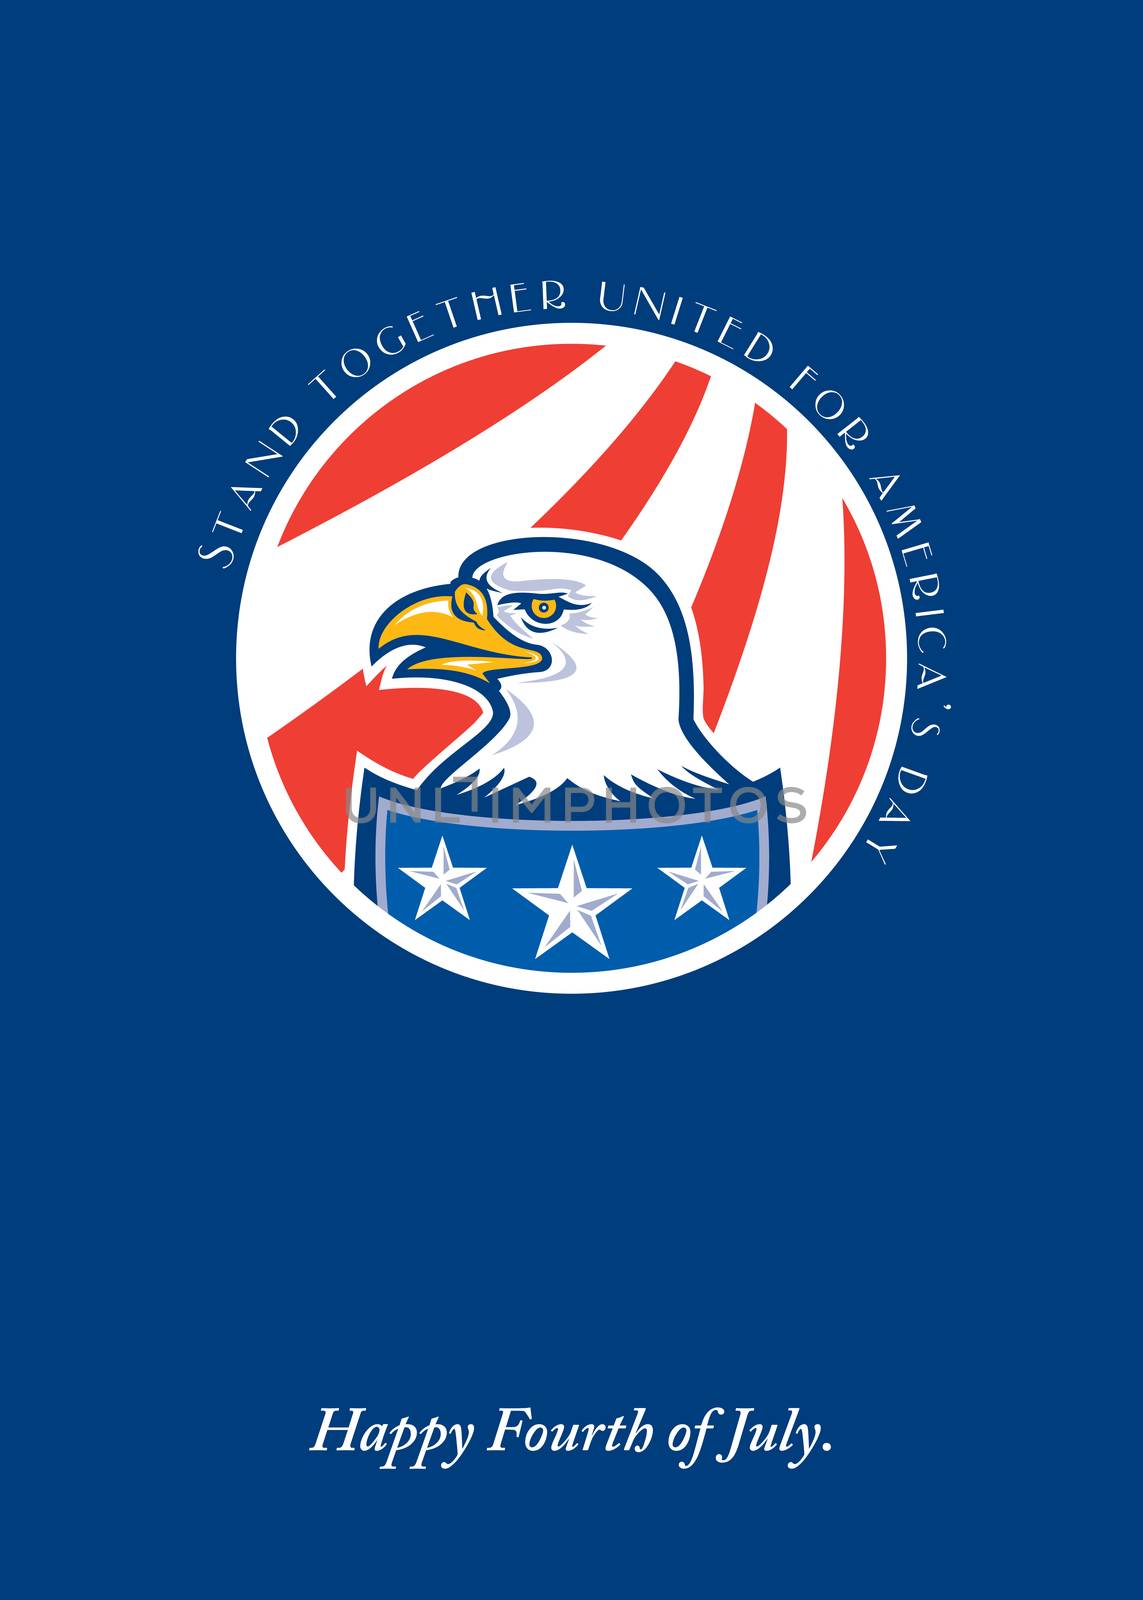 Independence Day or 4th of July greeting card featuring an illustration of an american bald eagle head viewed from the side with stars and stripes flag in the background set inside circle done in retro style and the words Stand Together United for America's Day outside the circle and Happy Fourth of July in the bottom. 